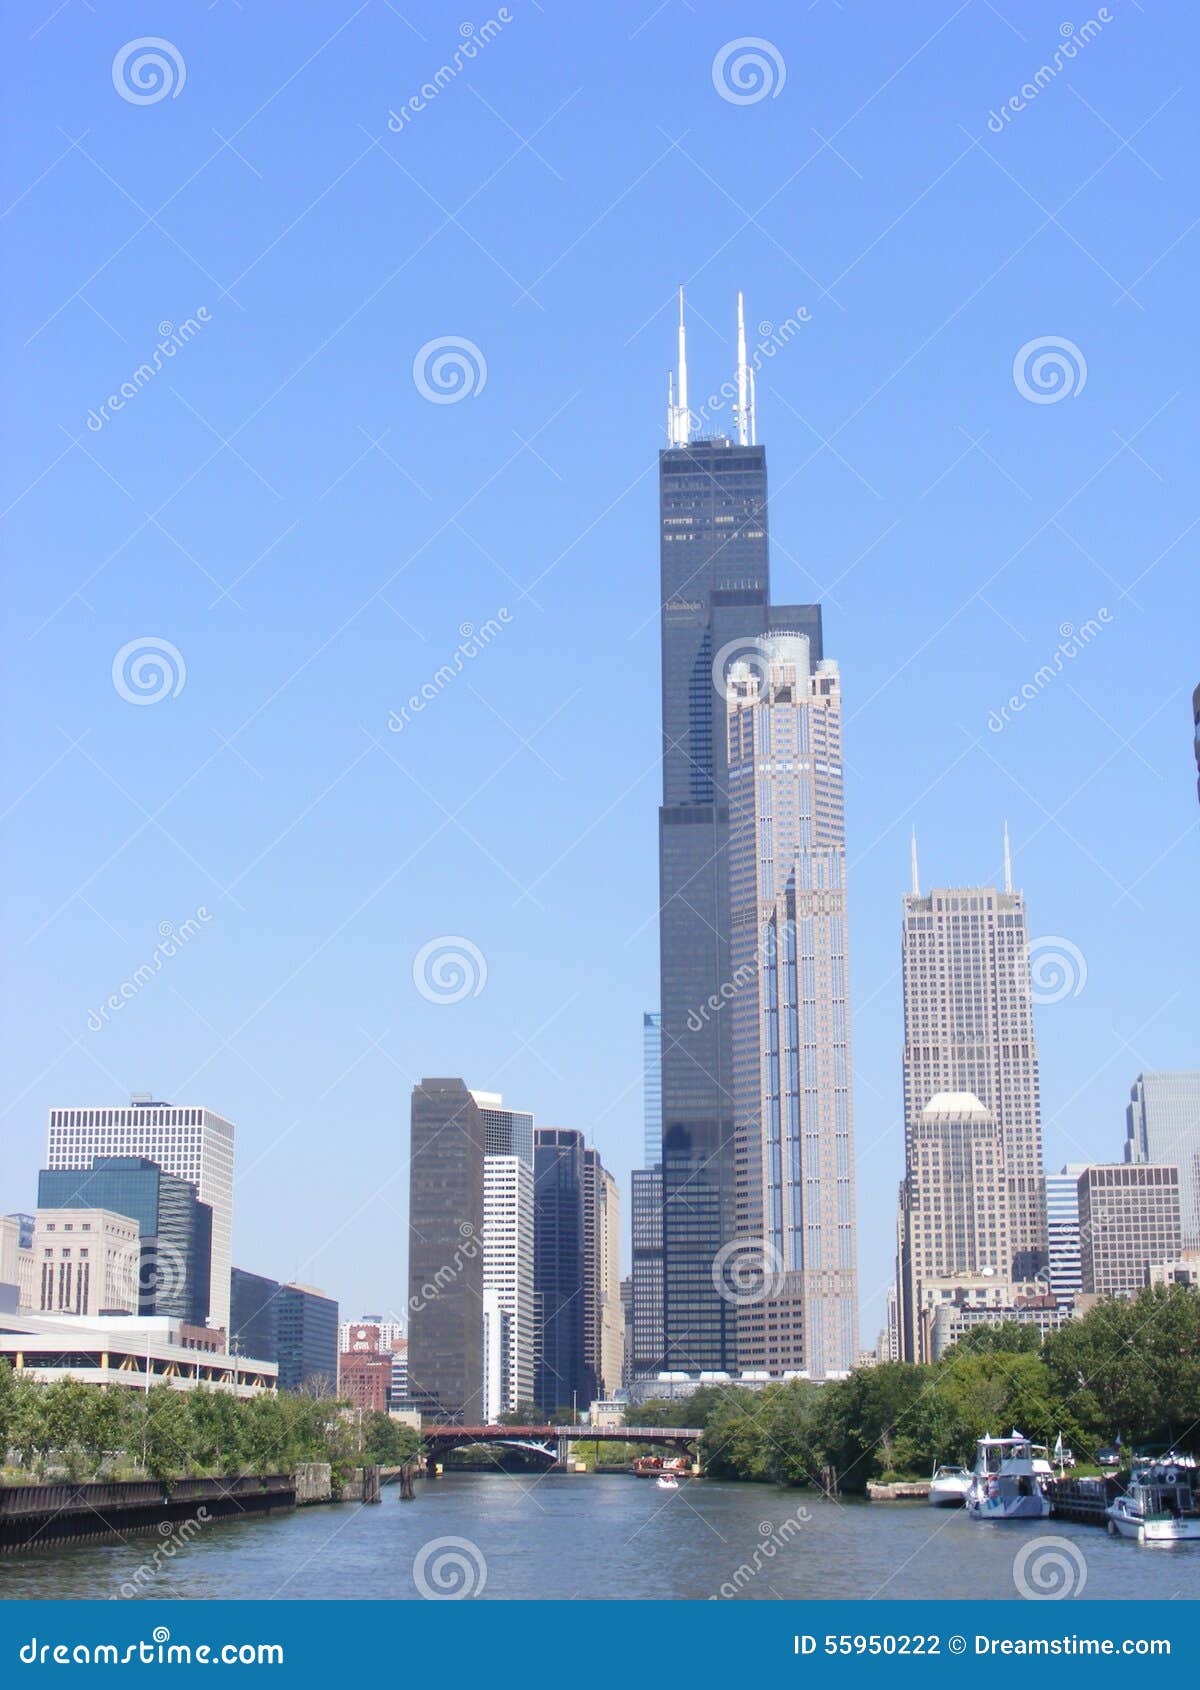 city view of downtown chicago featuring the sears tower